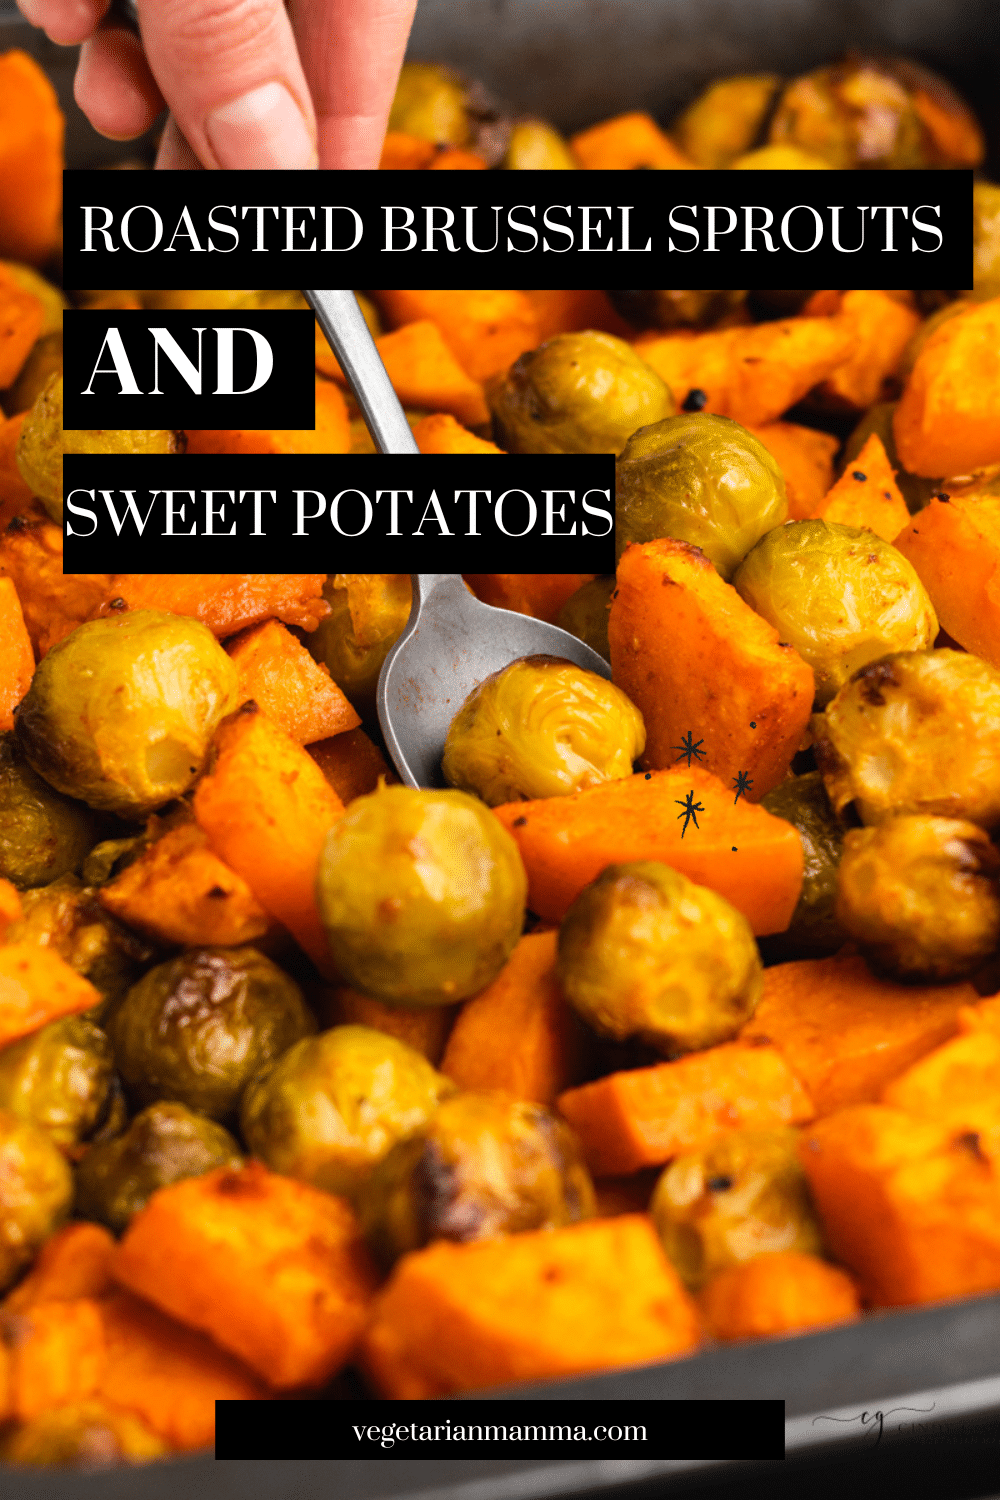 A close up photo of a hand dipping a spoon into a pan of roasted brussel sprouts and sweet potatoes. Text overlay says roasted brussel sprouts and sweet potatoes